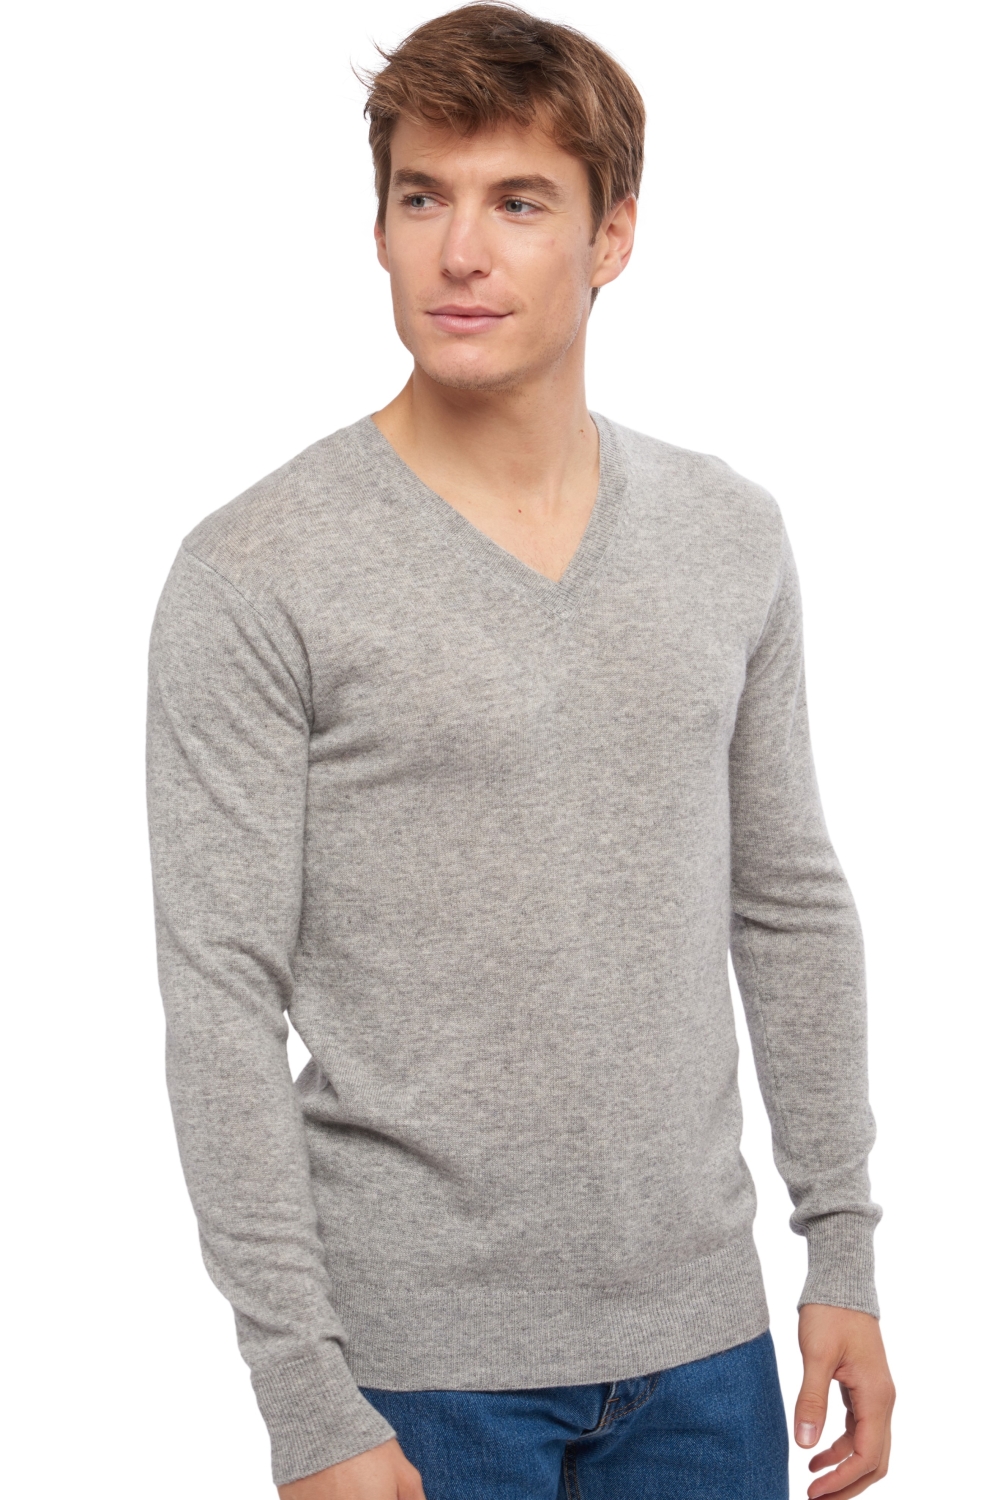 Cashmere men basic sweaters at low prices tor first fog grey xl